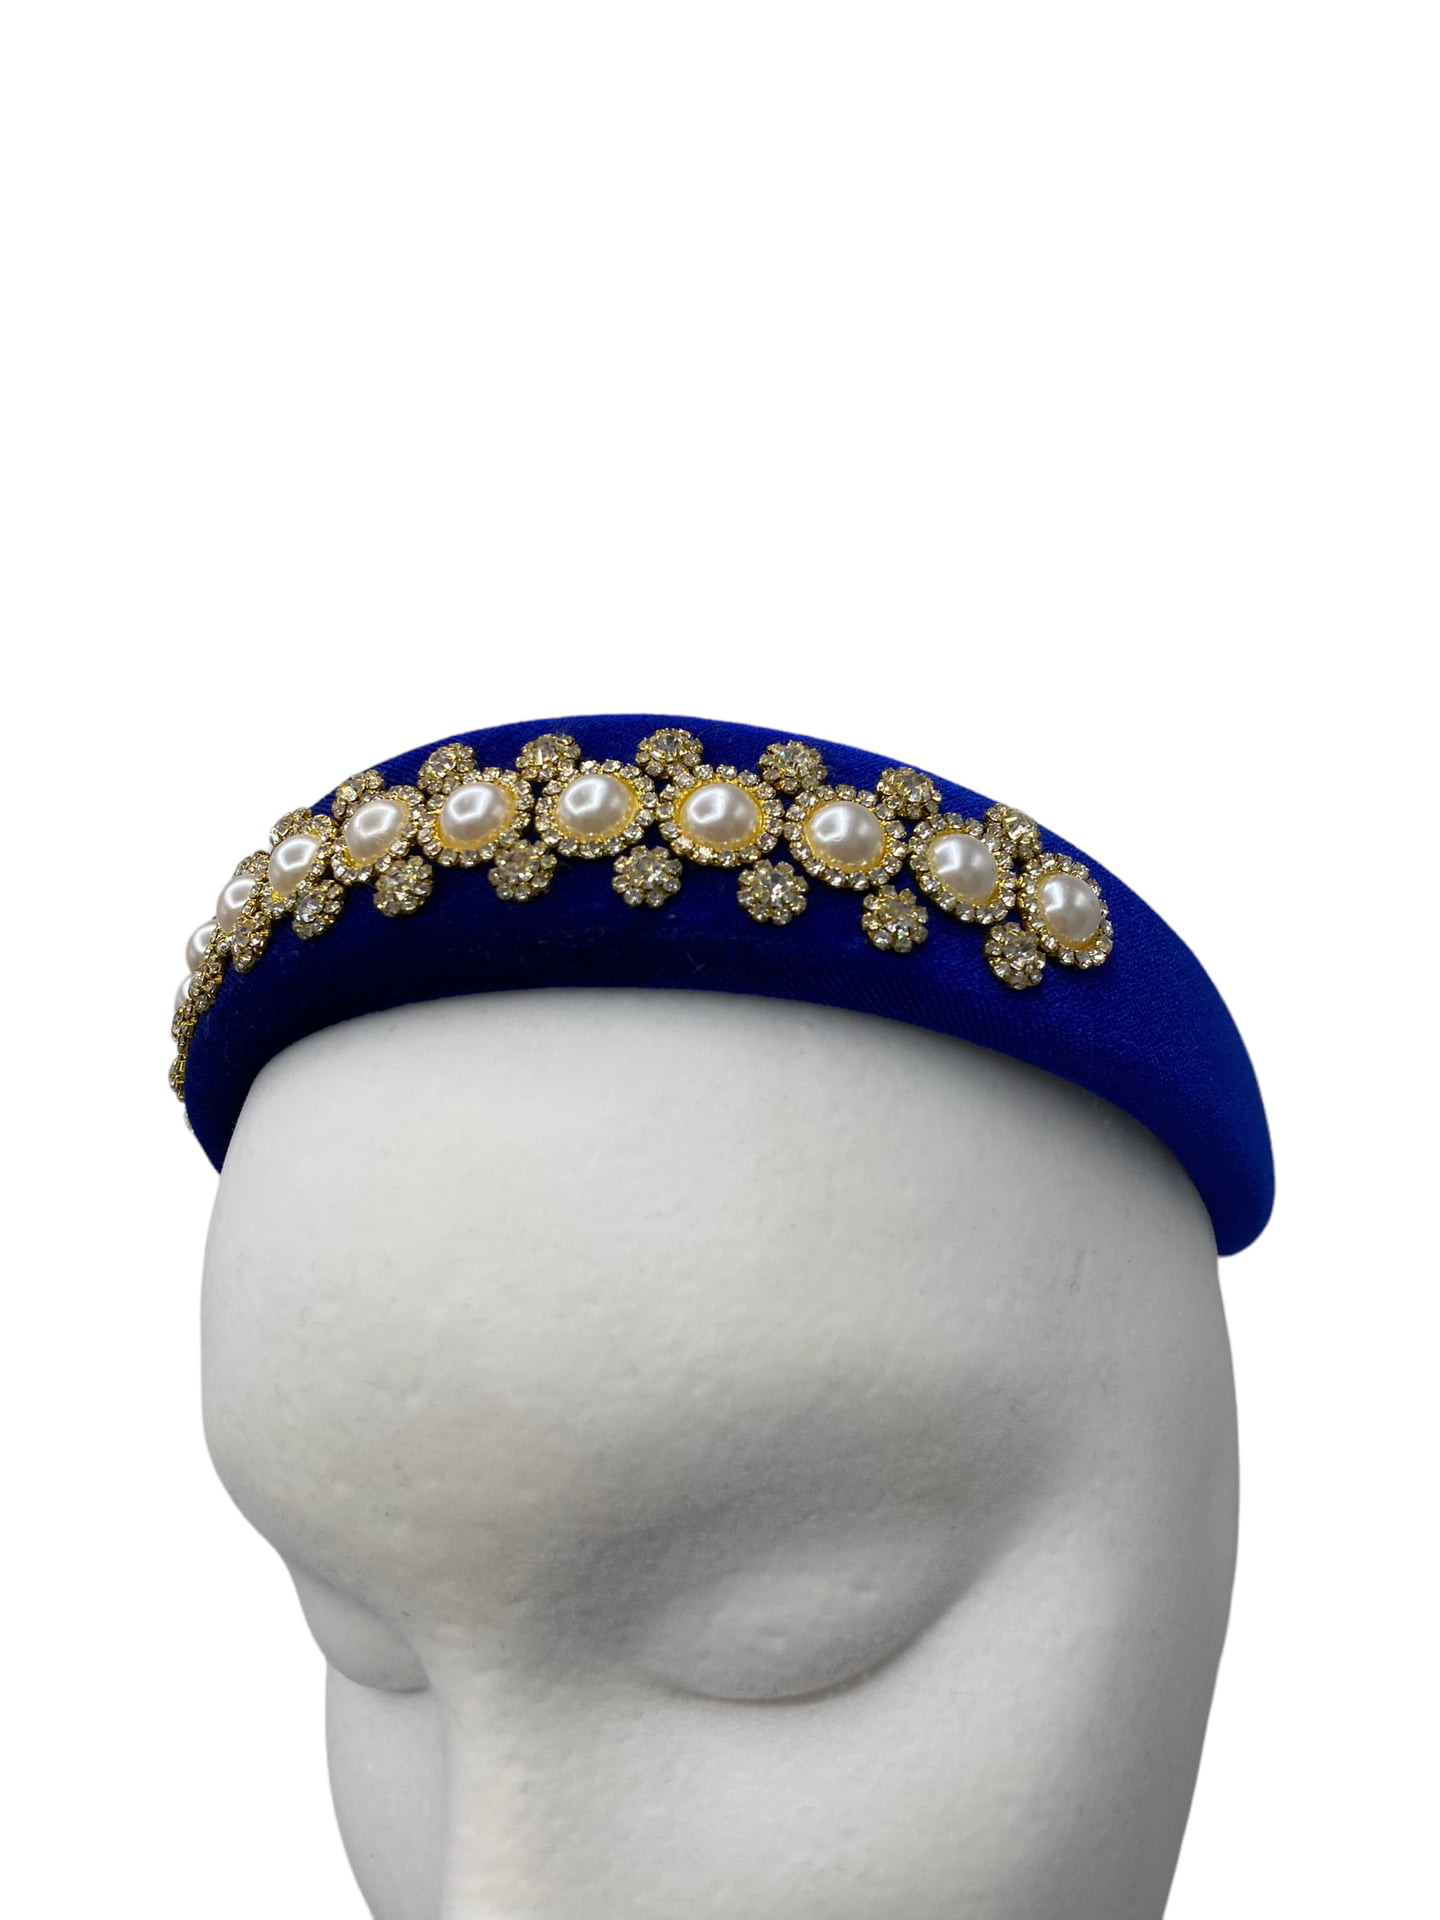 HATS FOR HIRE | LADIES DAY HAT | COBALT BLUE HEADBAND